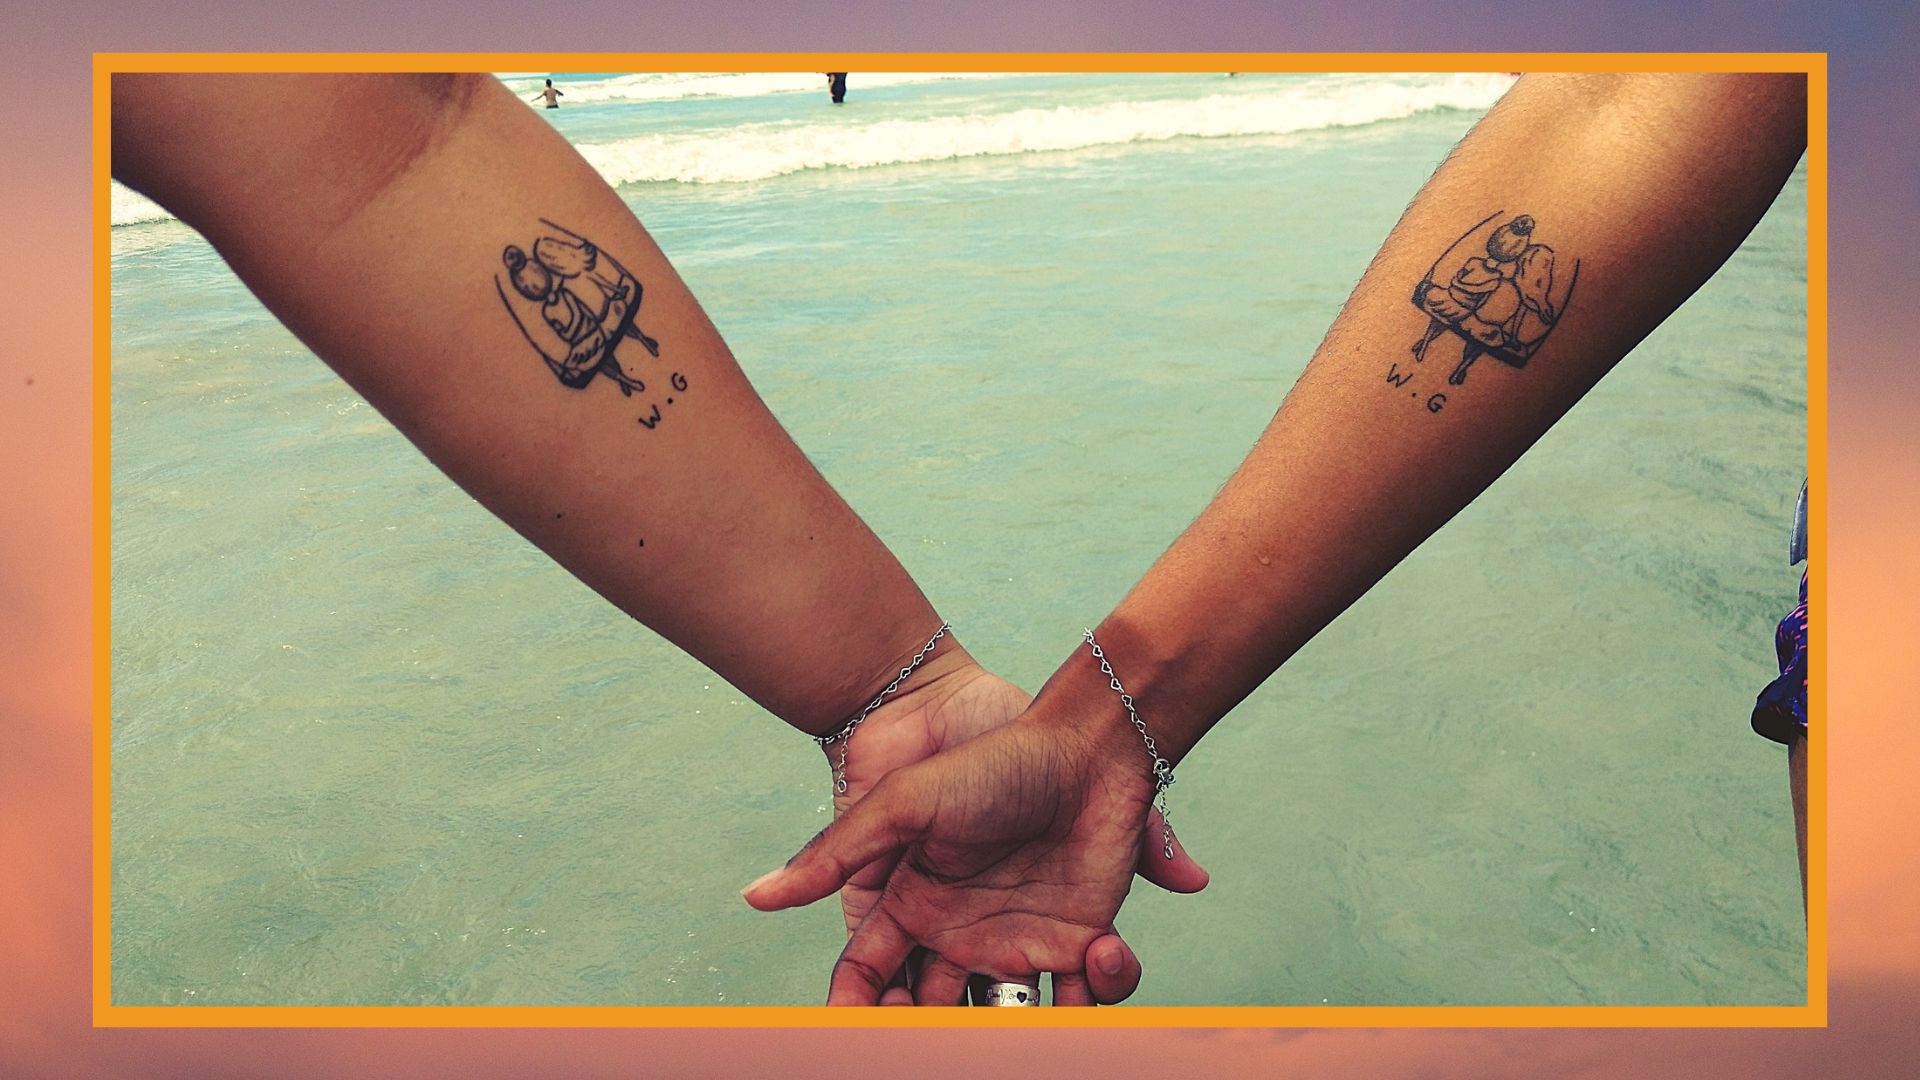 250+ Matching Best Friend Tattoos For Boy And Girl (2020) Small Friendship  Symbols ! - YouTube